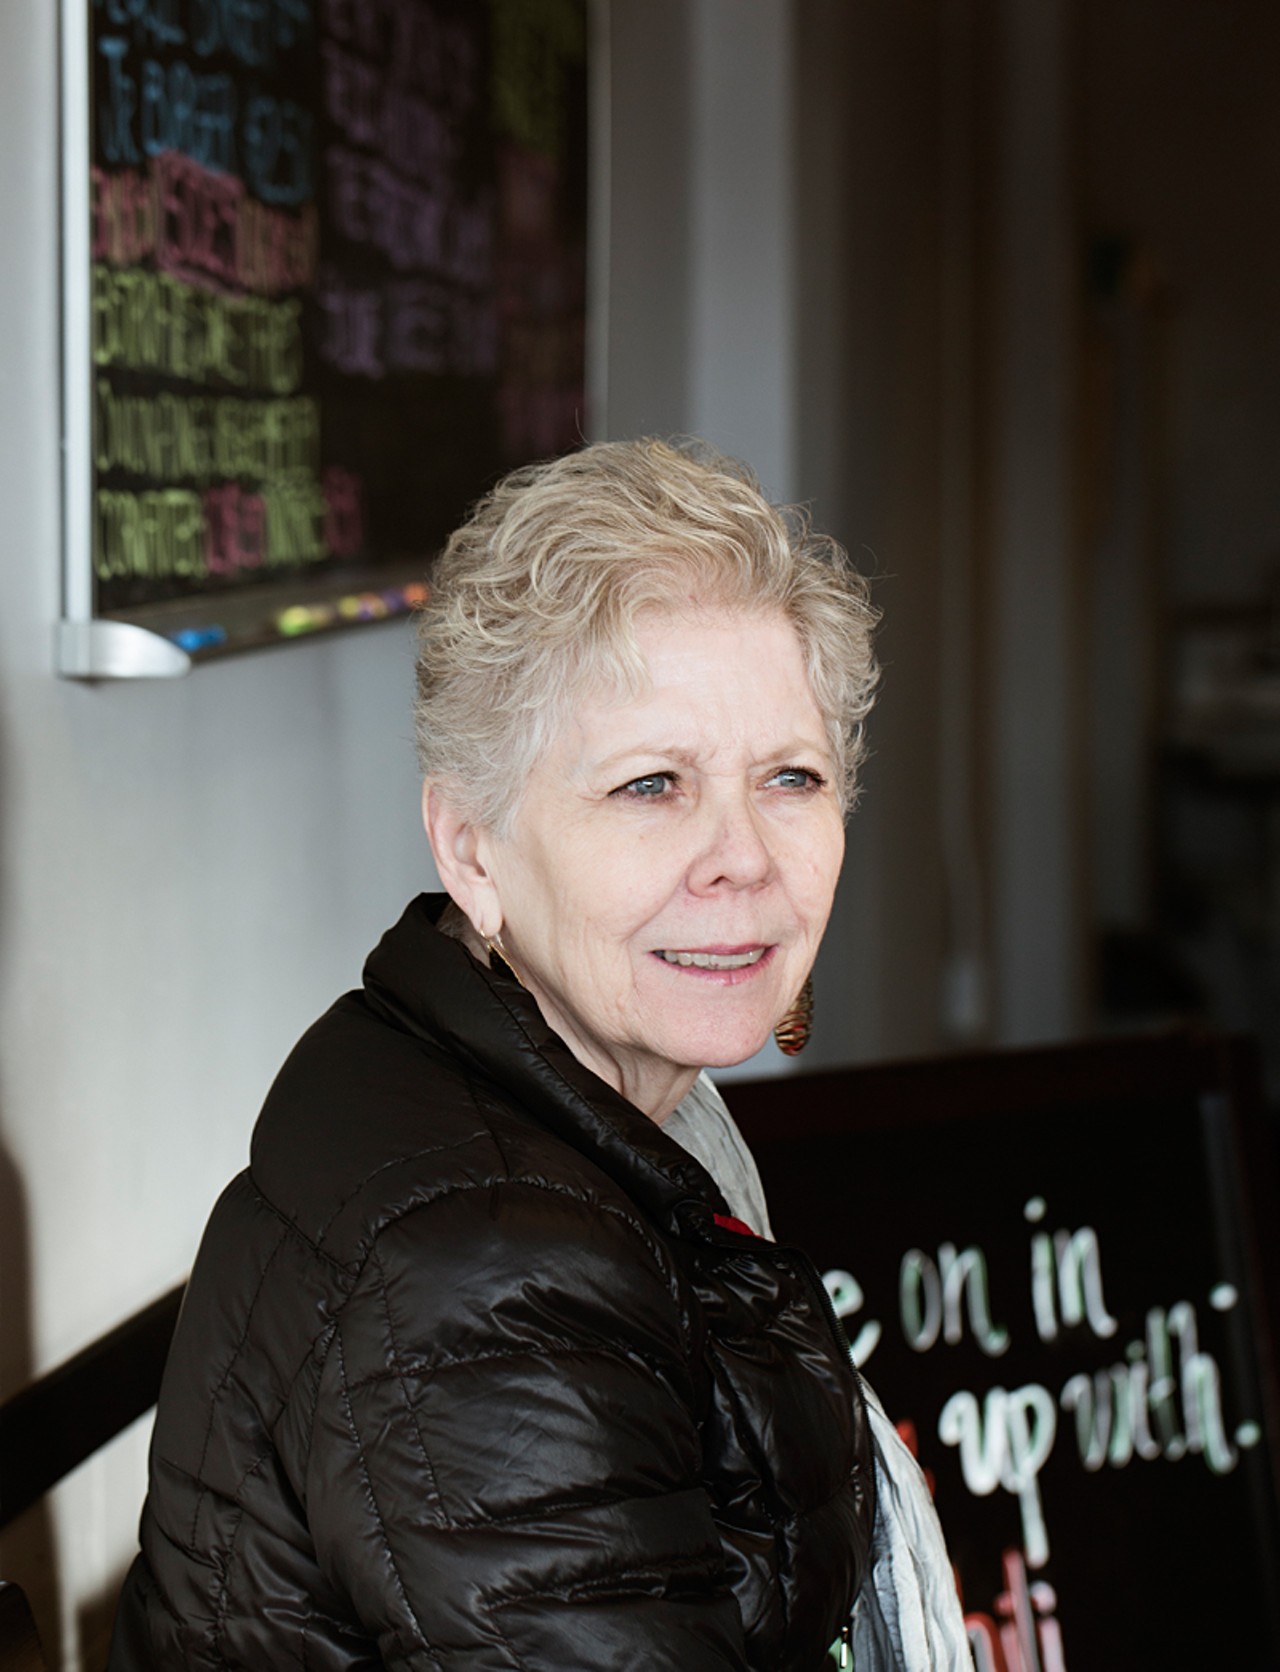 Carol Young Norton, of Norton's Cafe fame, used to employ Anthony Ellerson Jr. at Norton's.